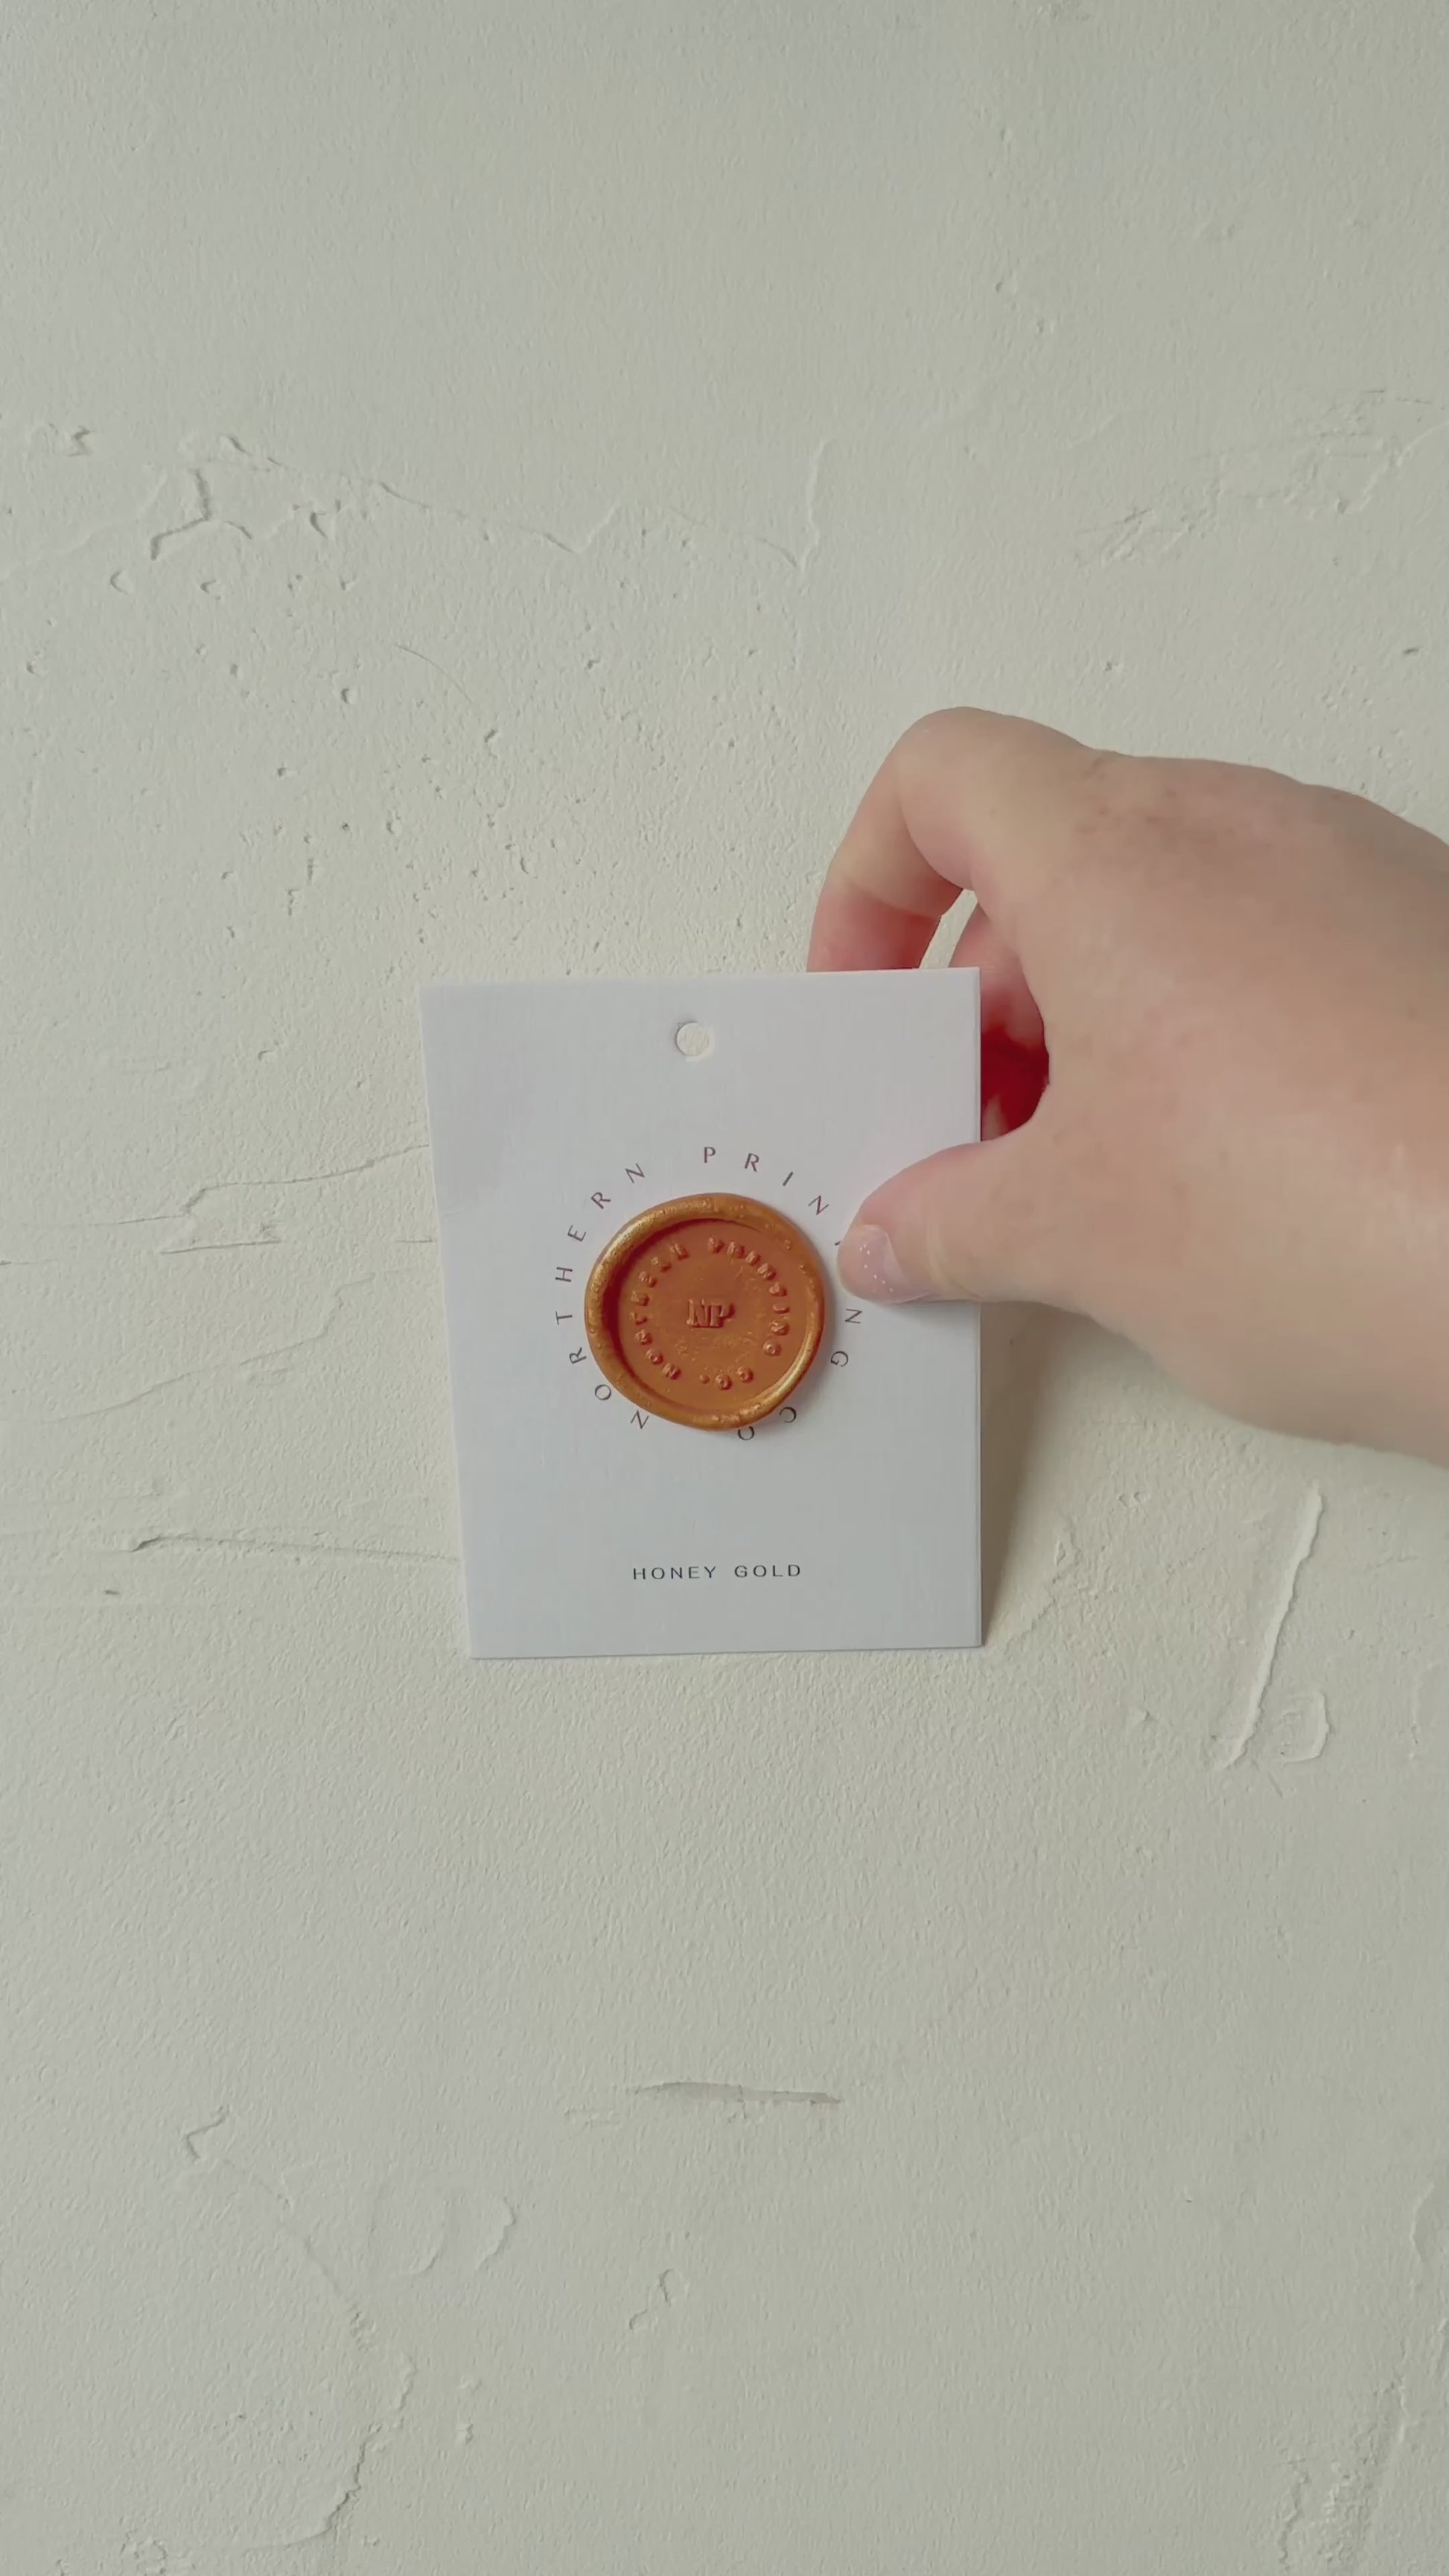 Video of Honey Gold wax seal stamp sample on textured background